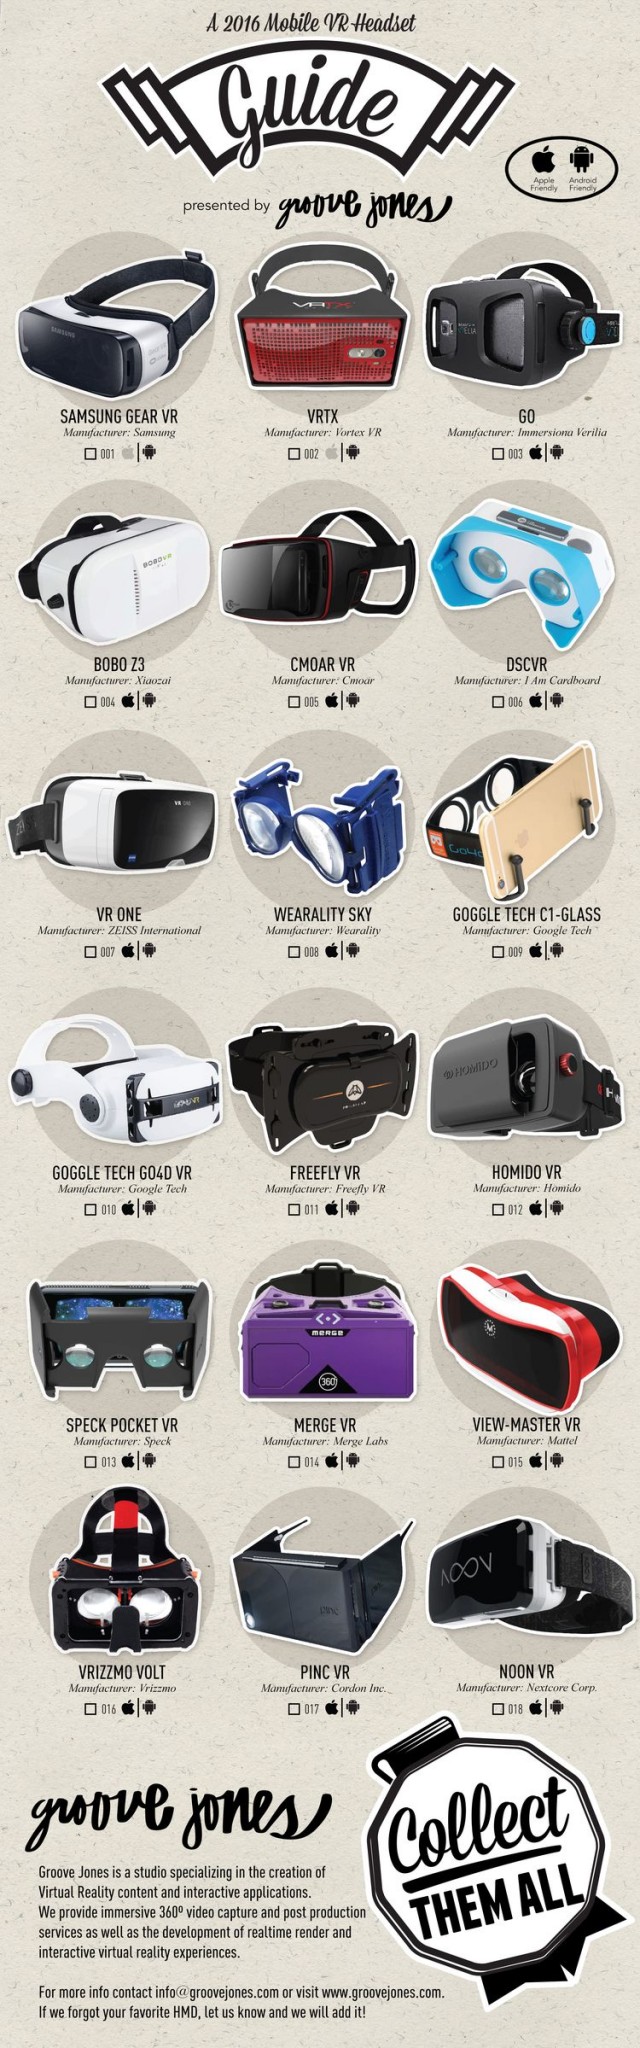 vr devices